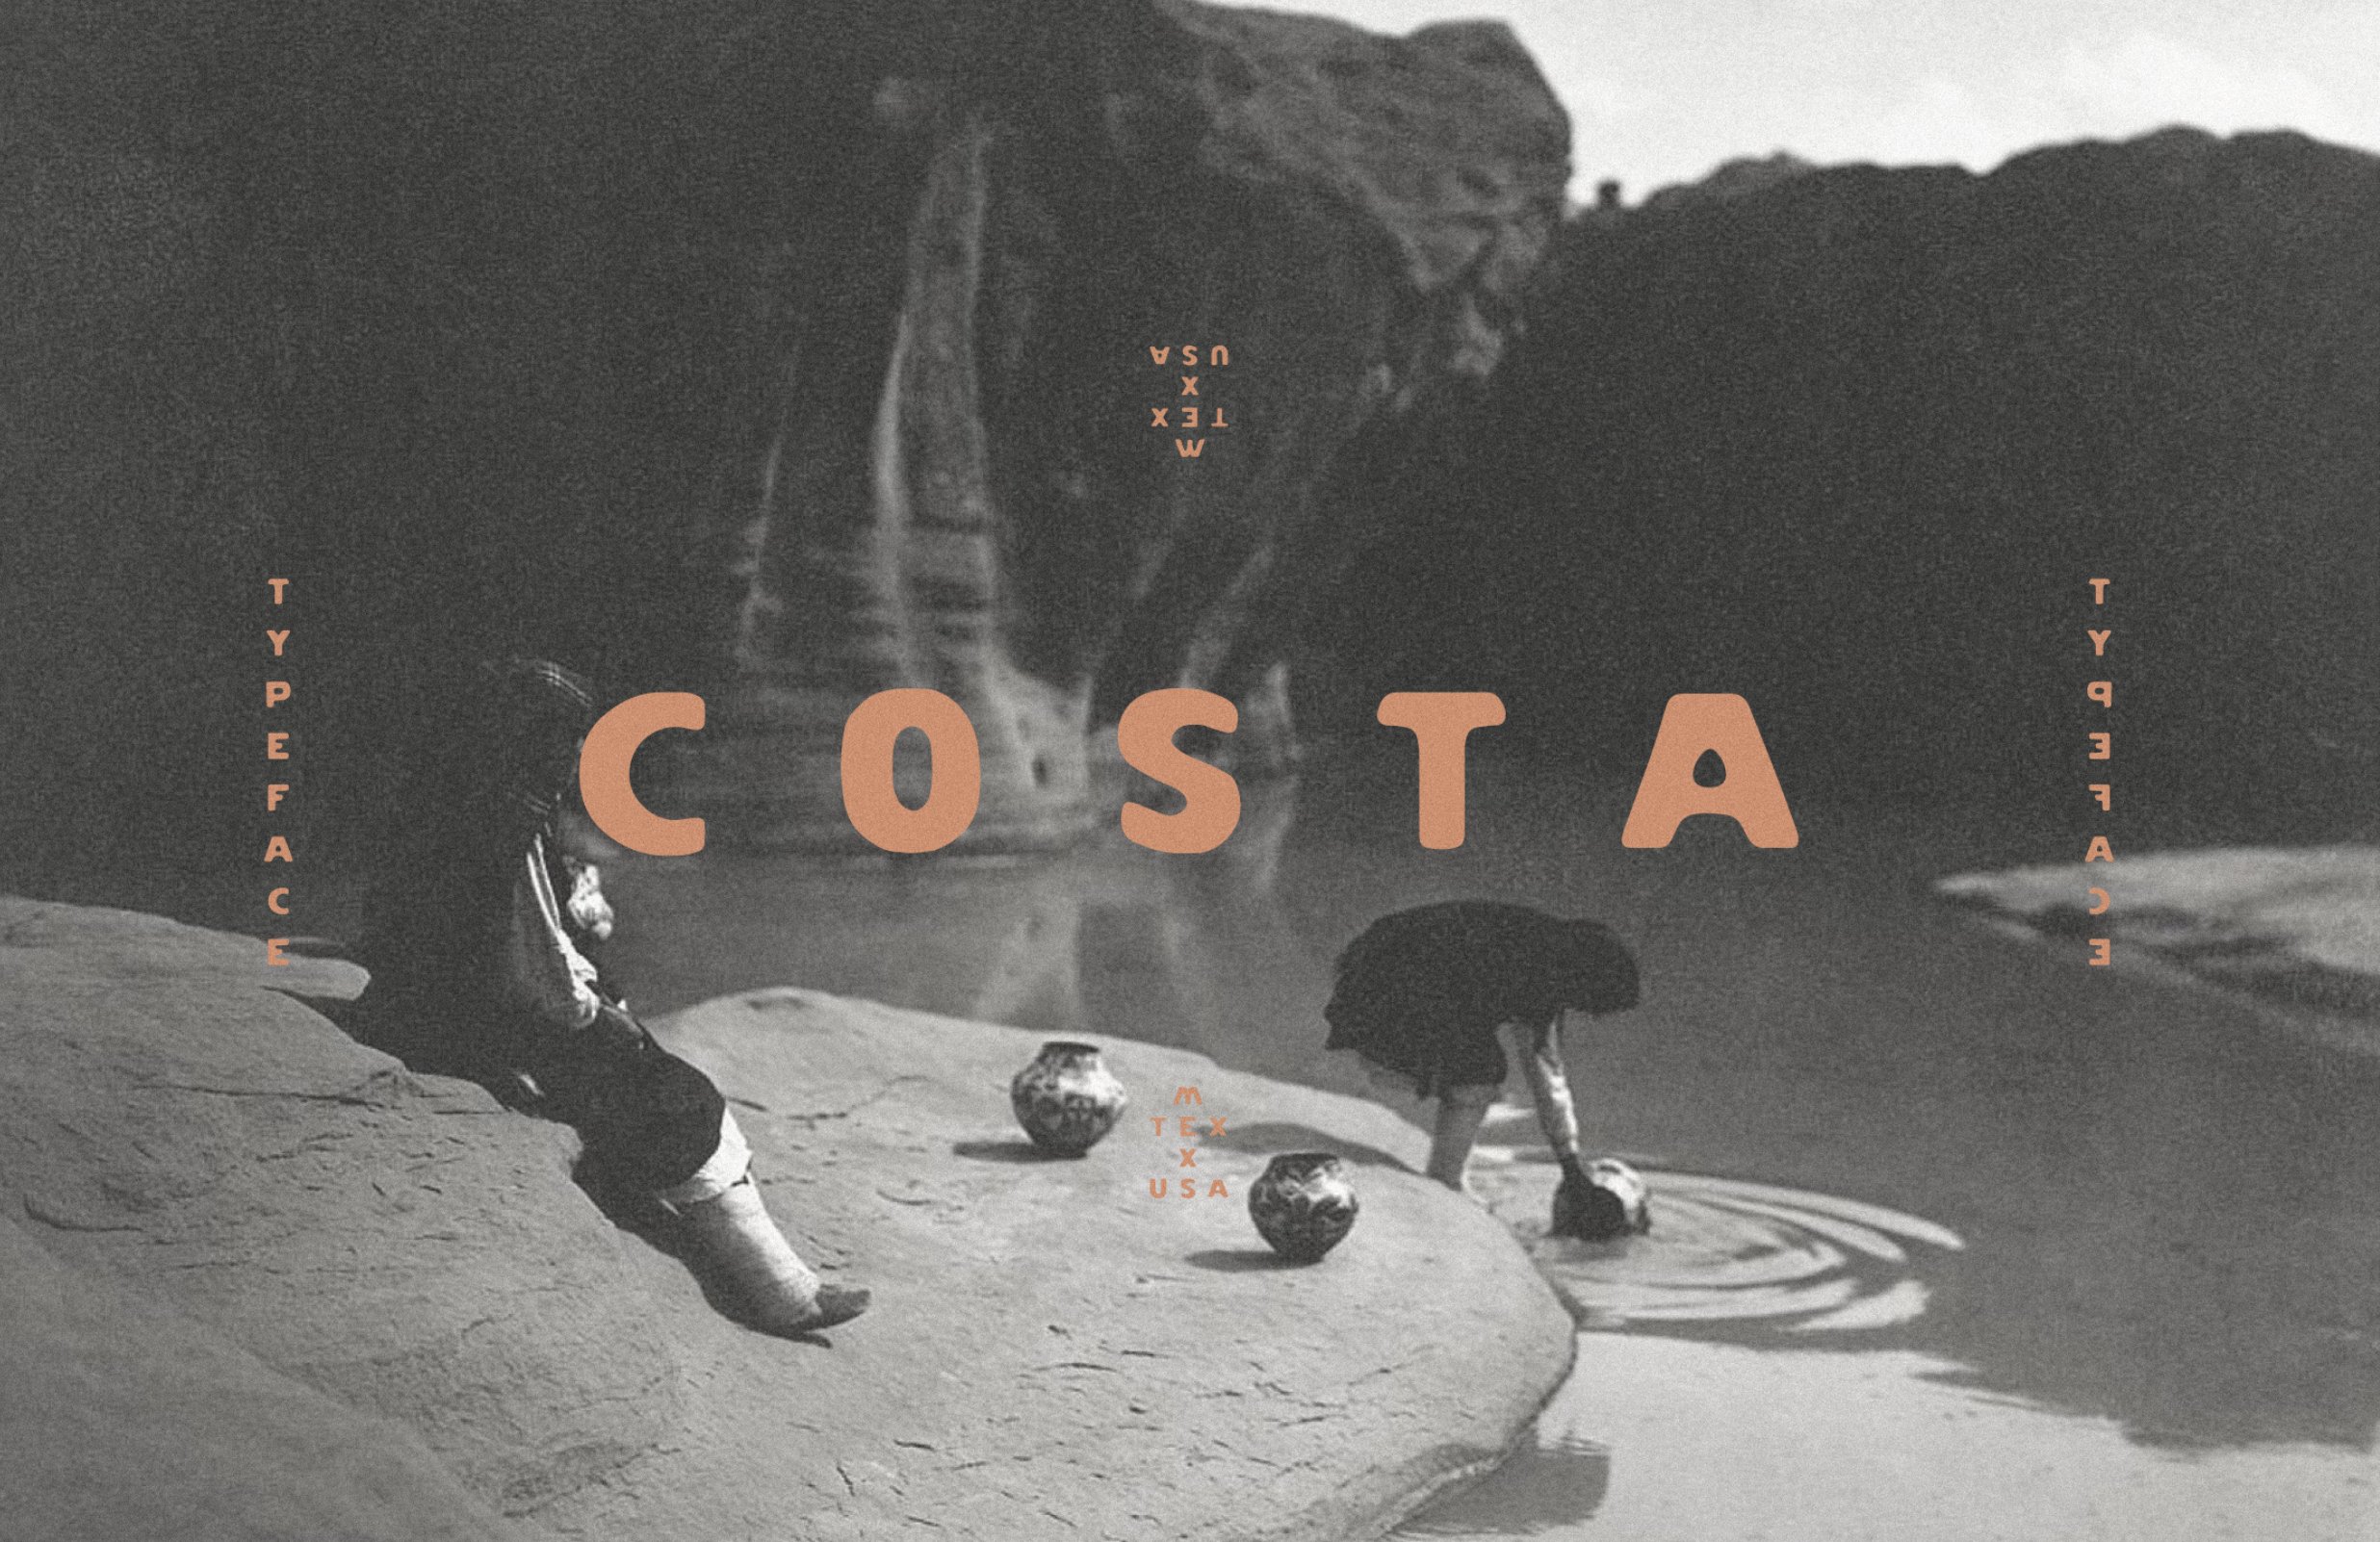 Costa Typeface cover image.